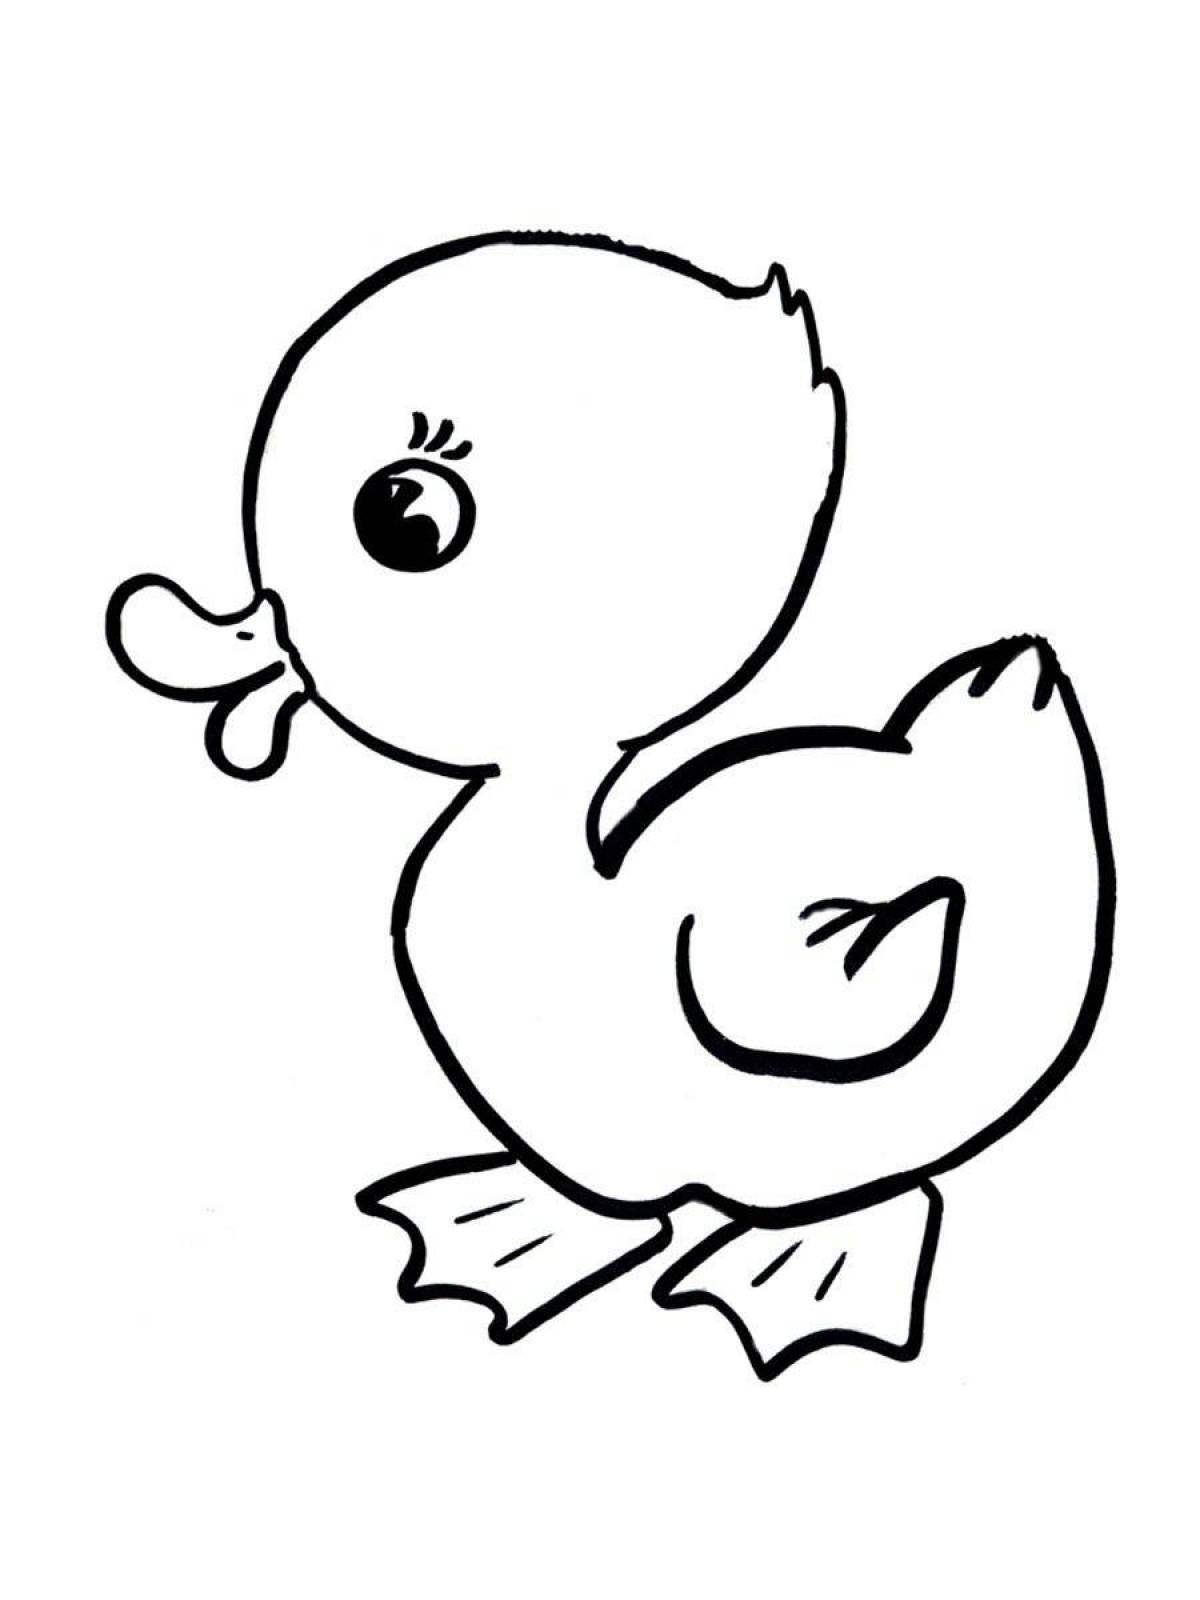 Color-explosion duck coloring page for kids